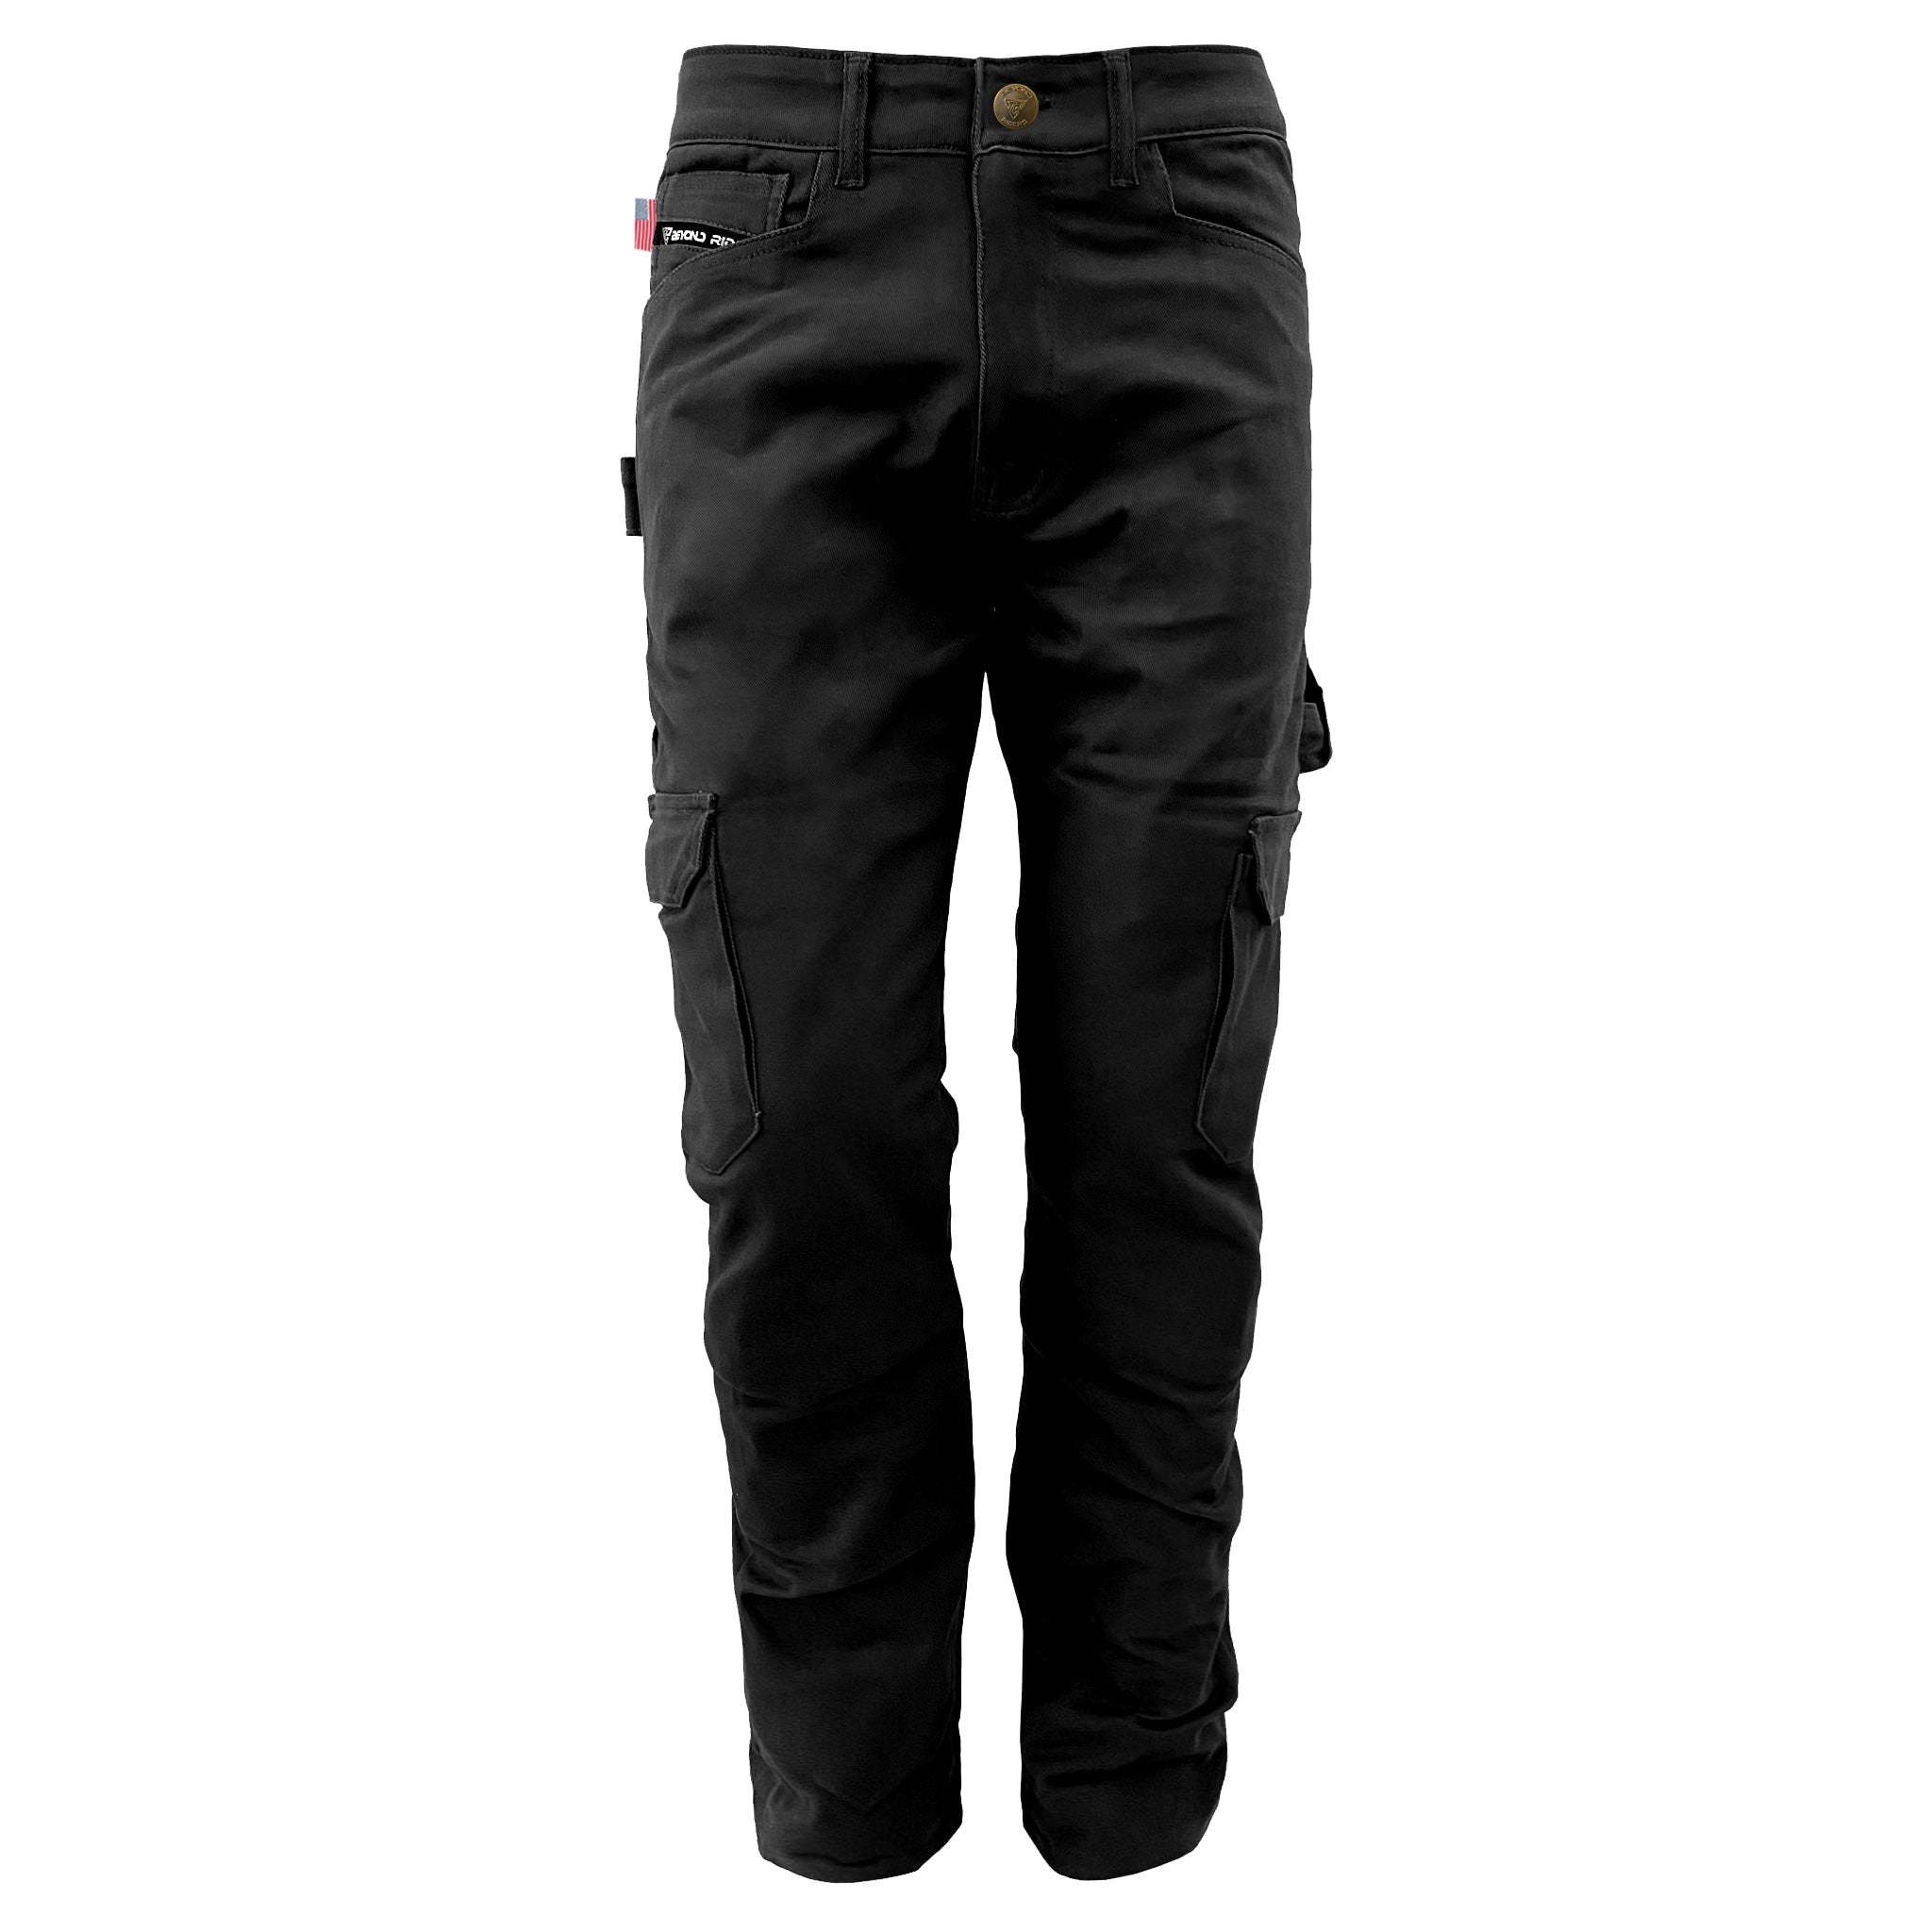 Relaxed Fit Cargo Pants - Black with Pads